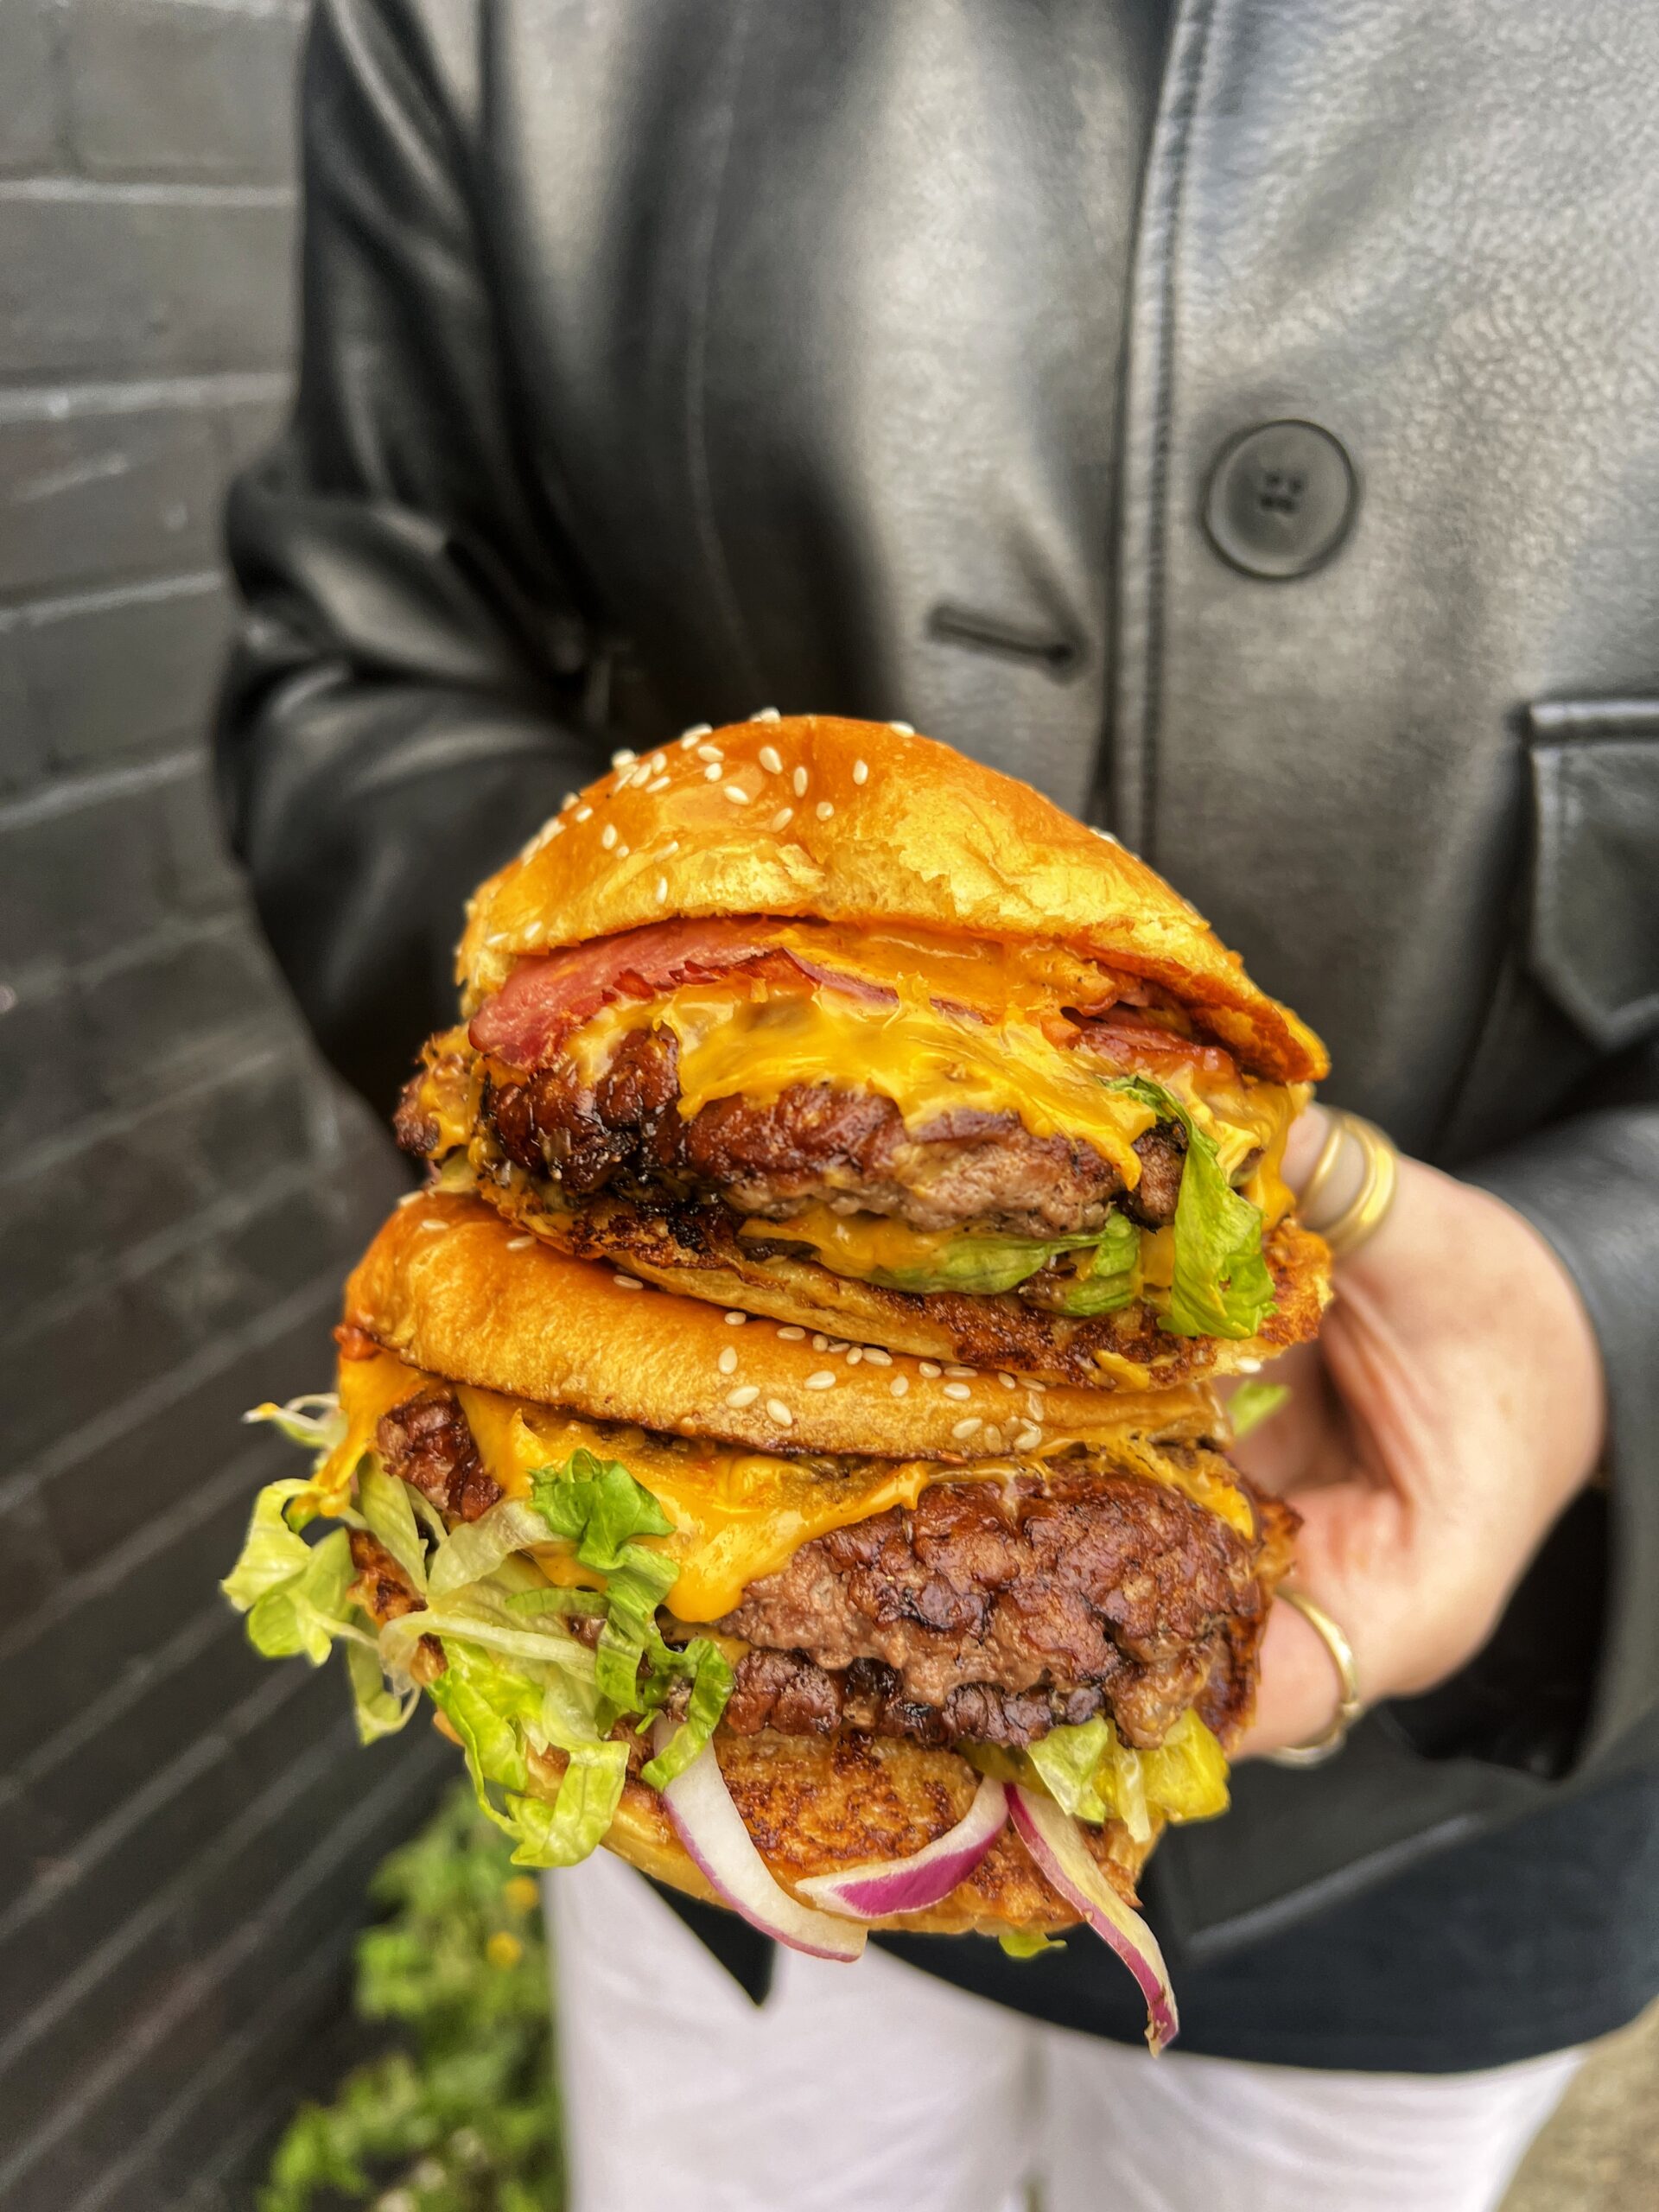 Burgerism in Greater Manchester has been named the seventh best burger in Britain. Credit: The Manc Group